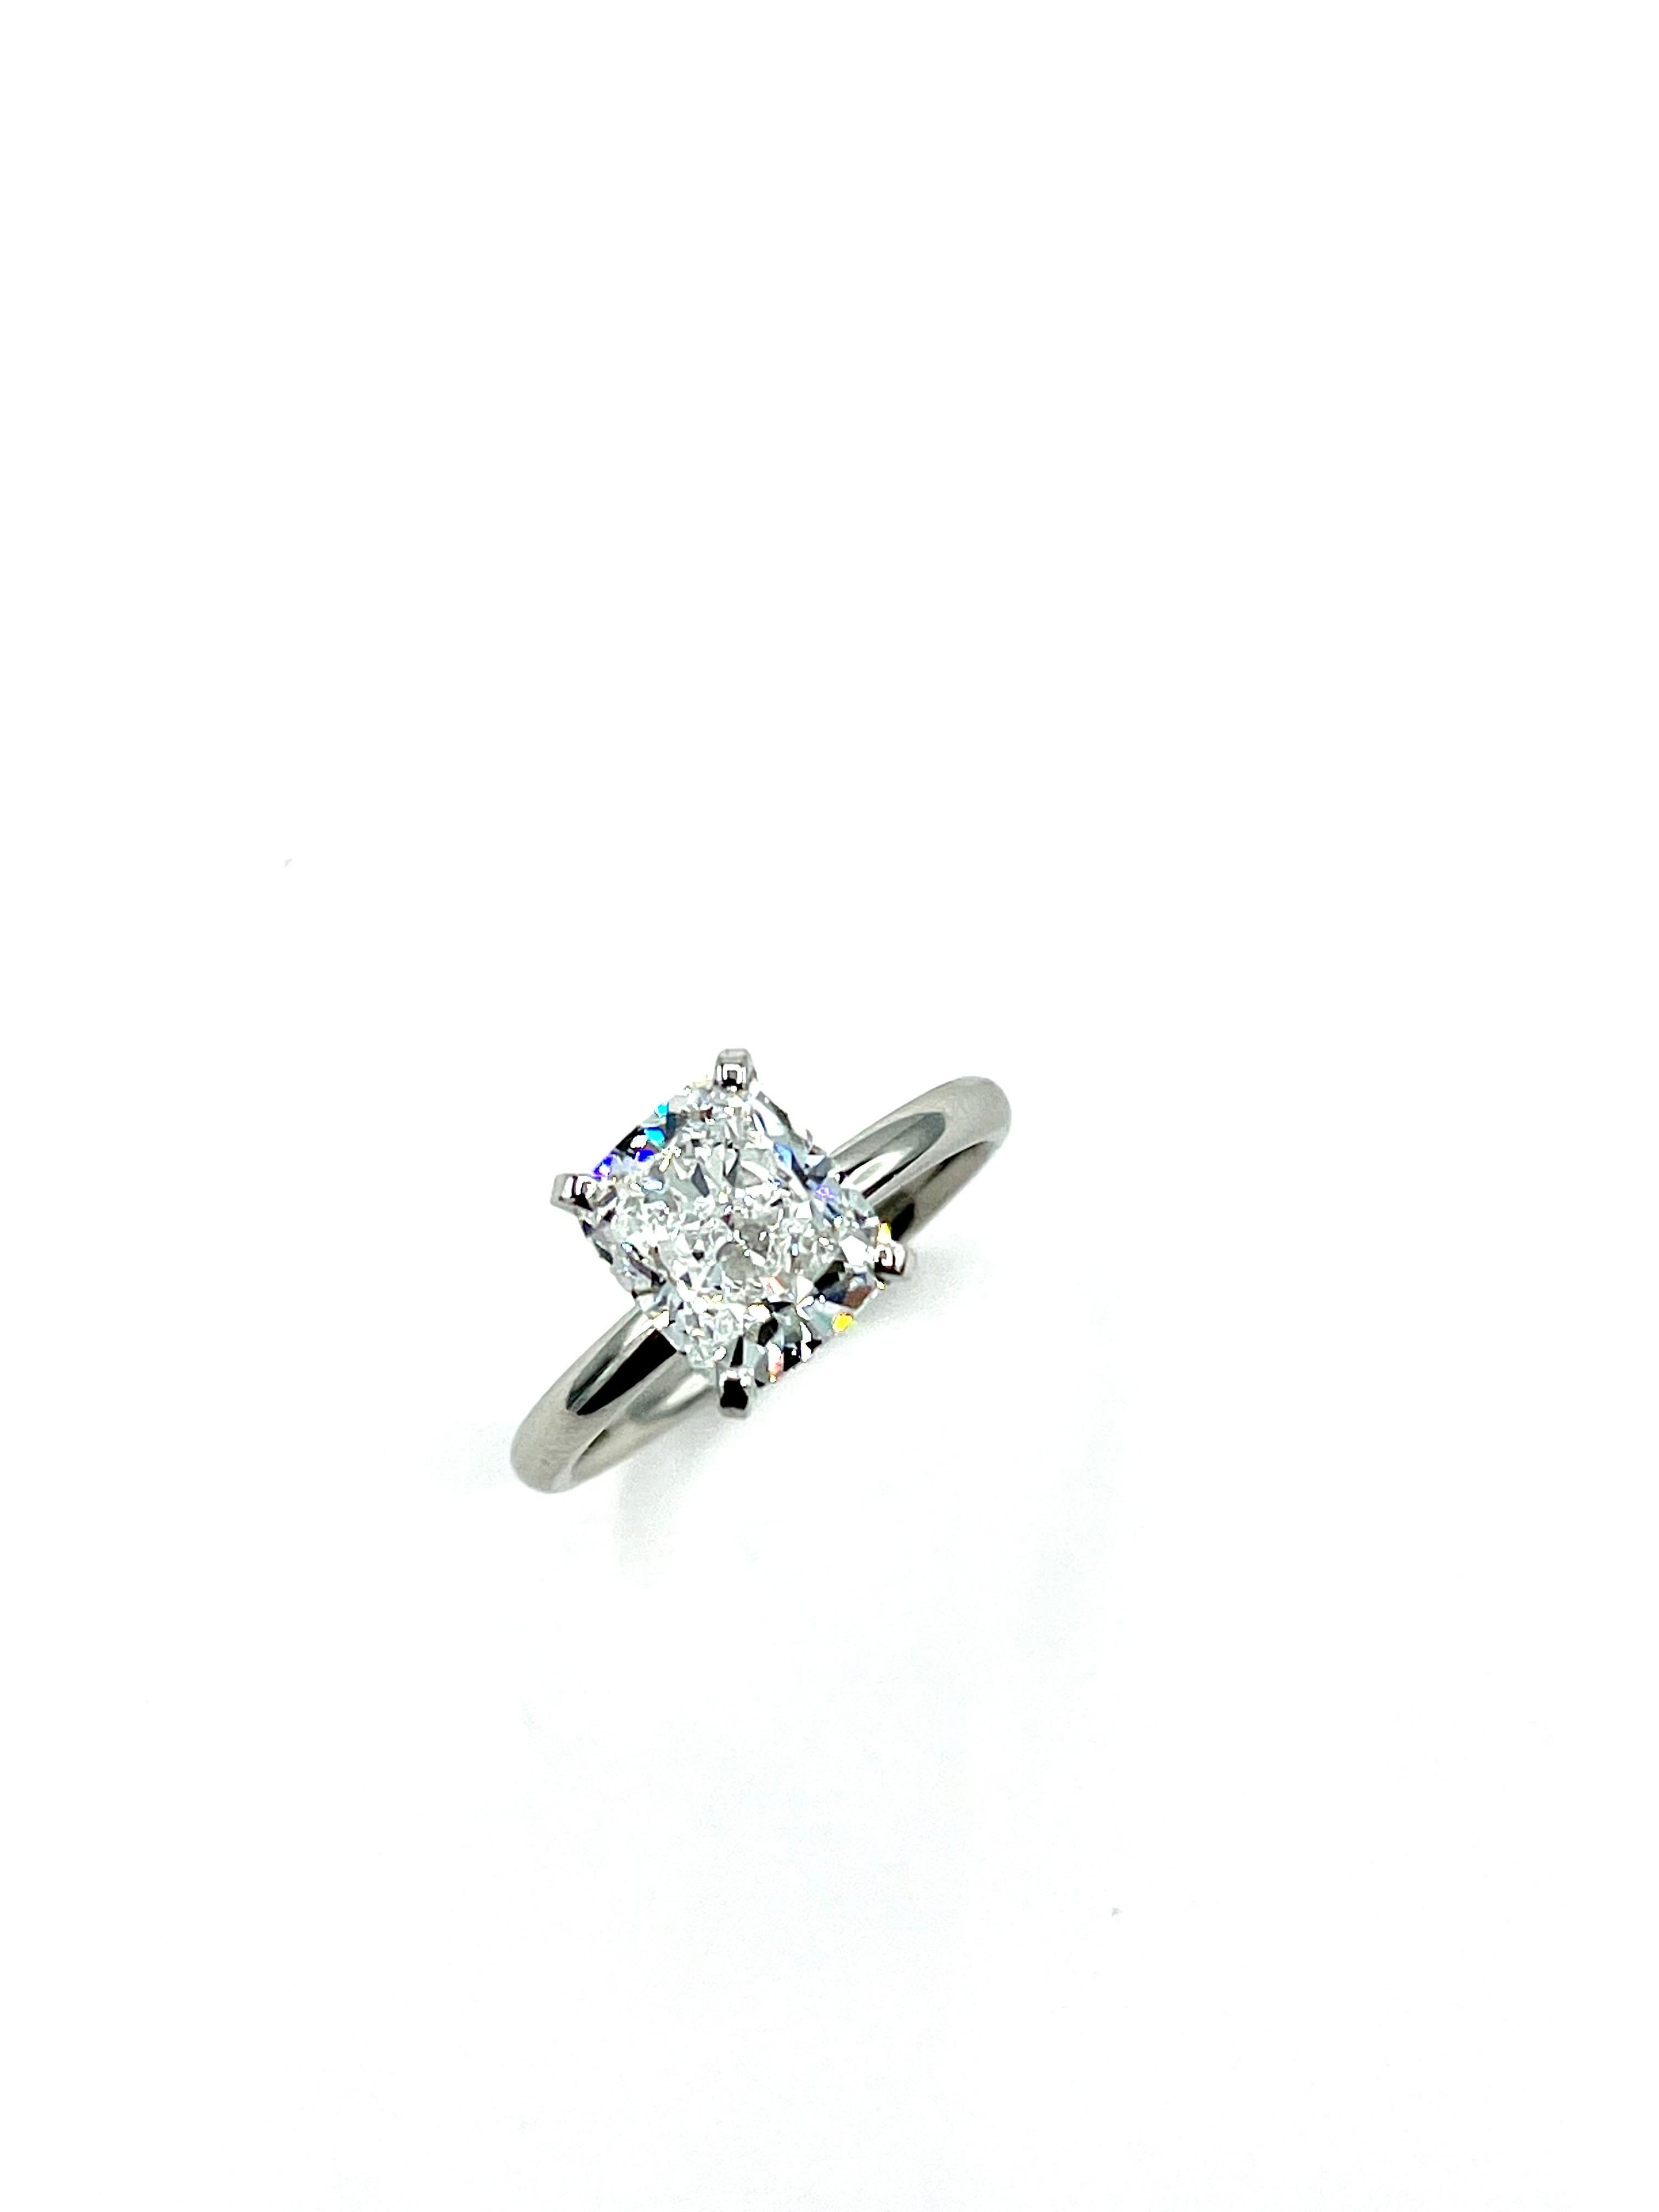 A gorgeous cushion cut Diamond solitaire ring.  The Diamond is set in a simple four prong platinum mounting.  The Diamond weighs 2.60 carats, and is graded as D color, VS2 clarity, by GIA report number 6402833165.  This cushion displays wonderful